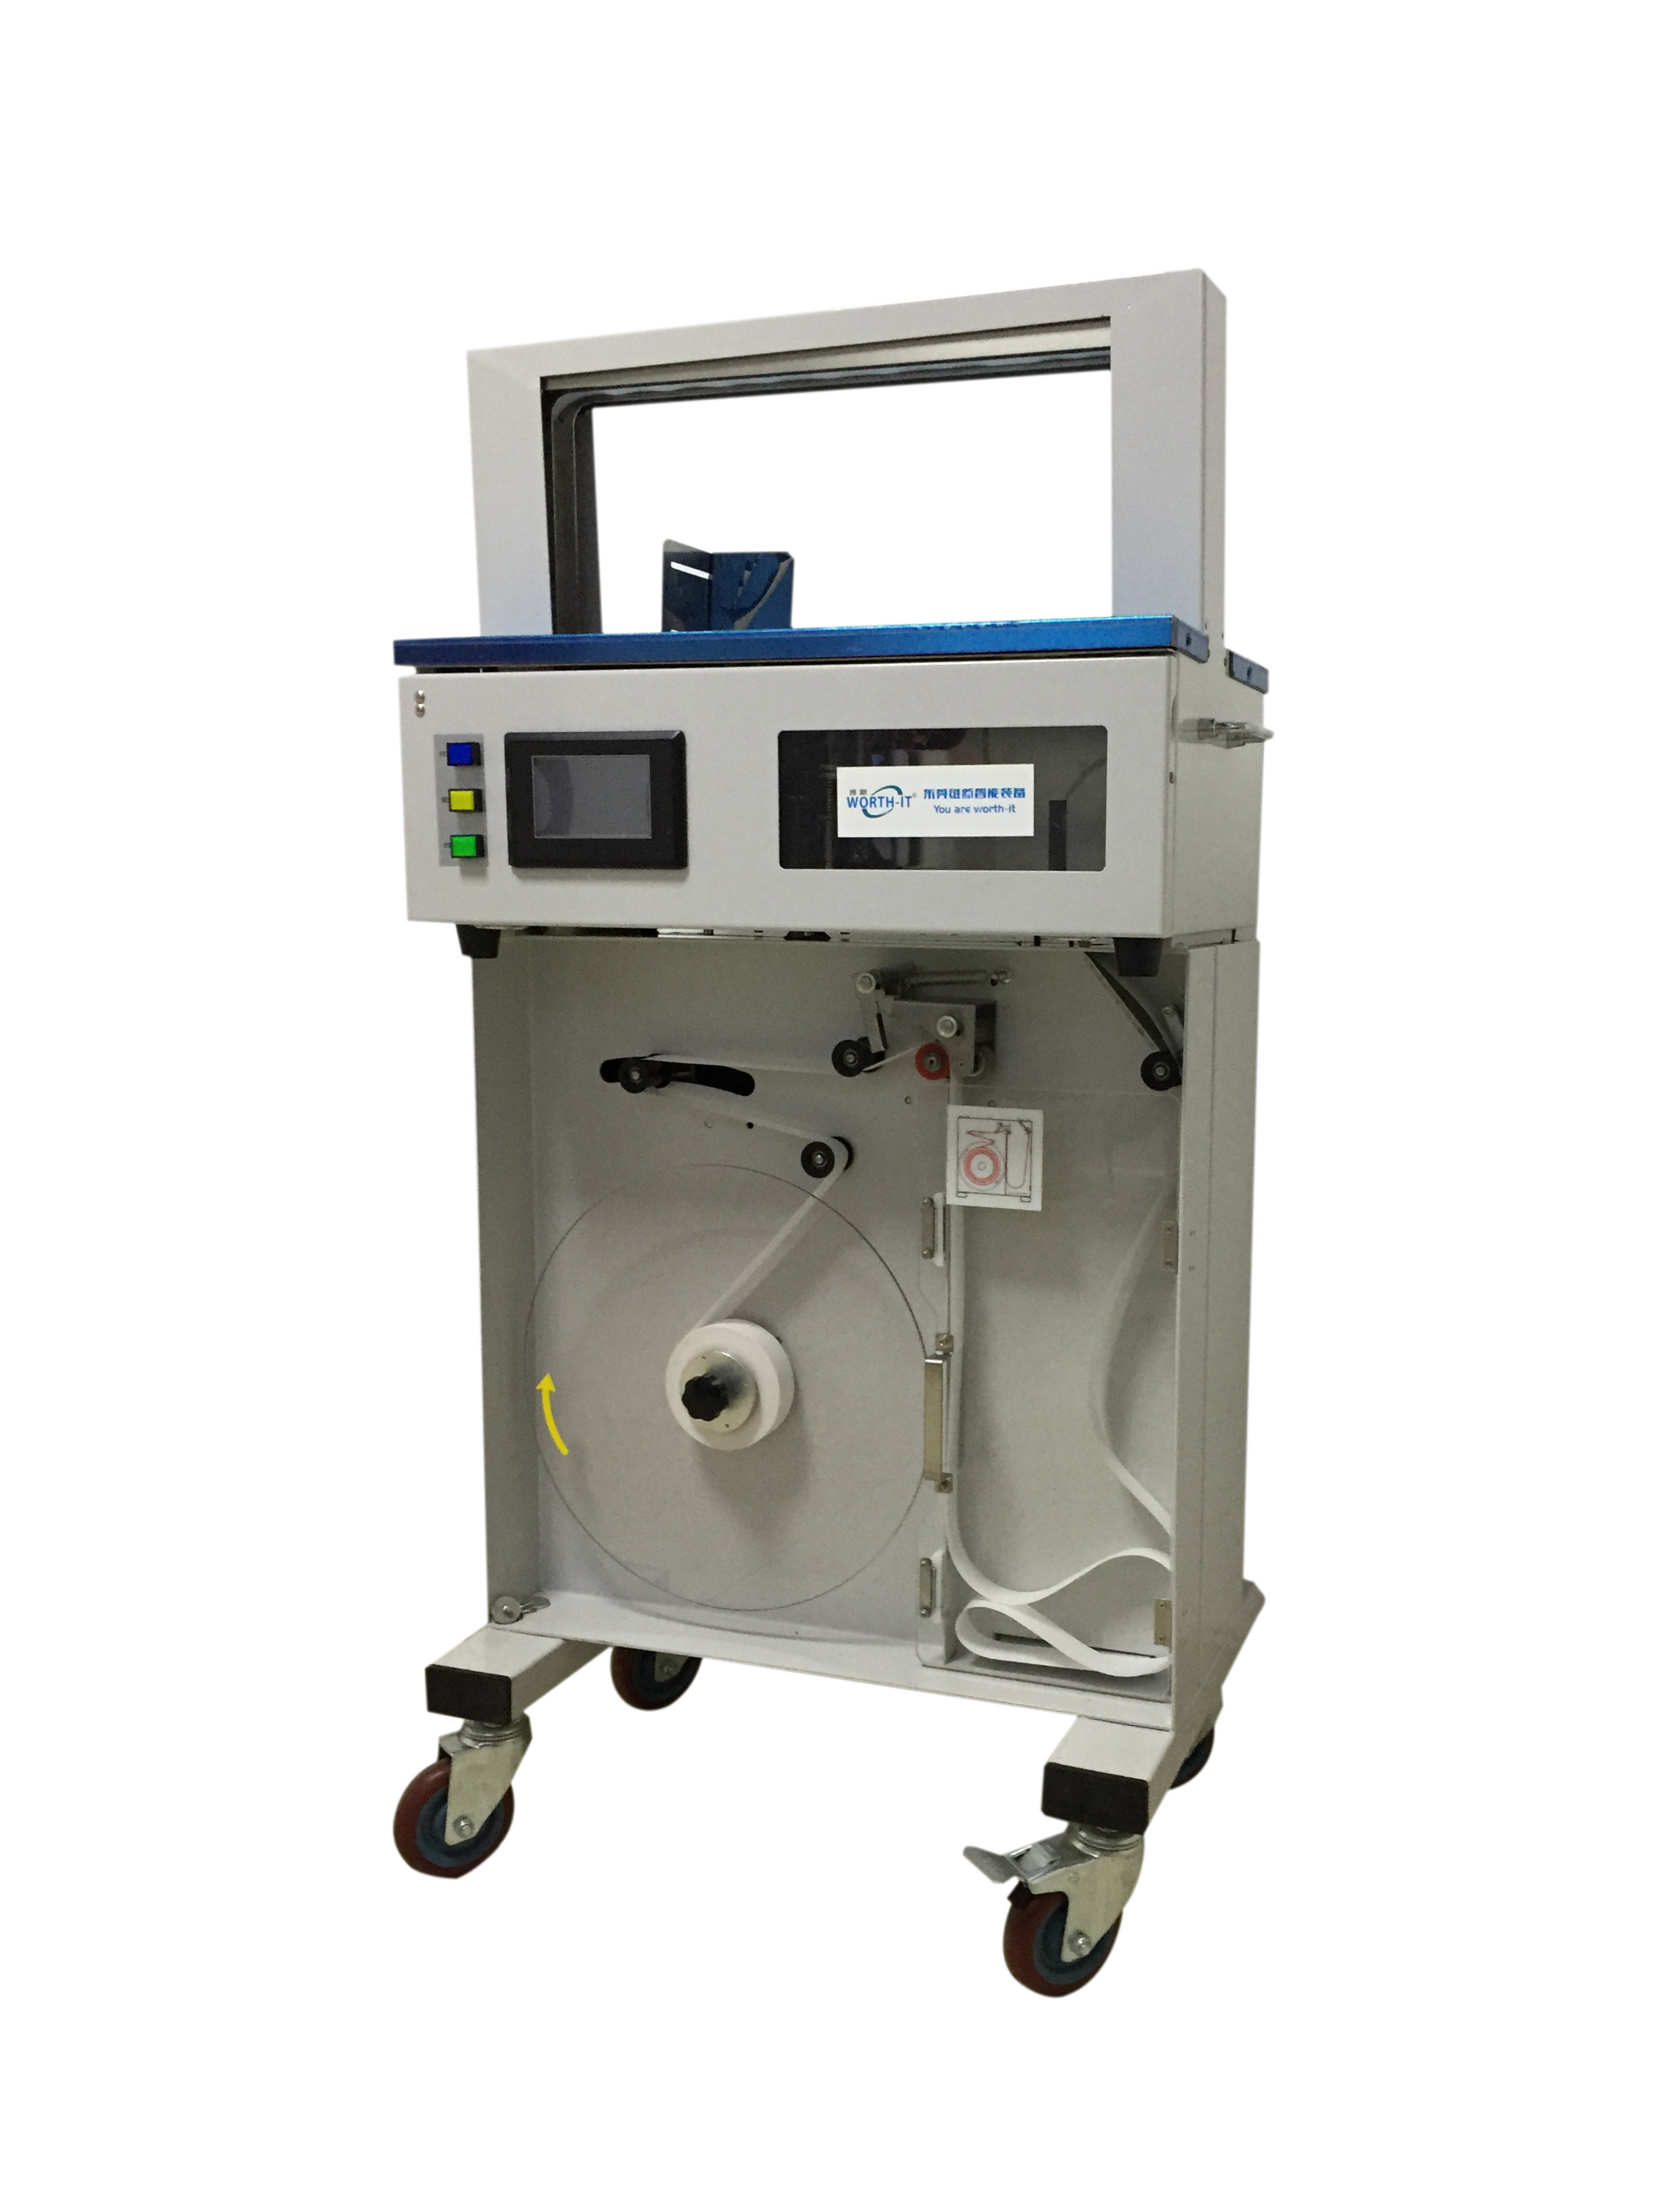  Mobile High Speed Automatic Banding machine multipurpose bunding systerm for food Industry Manufactures